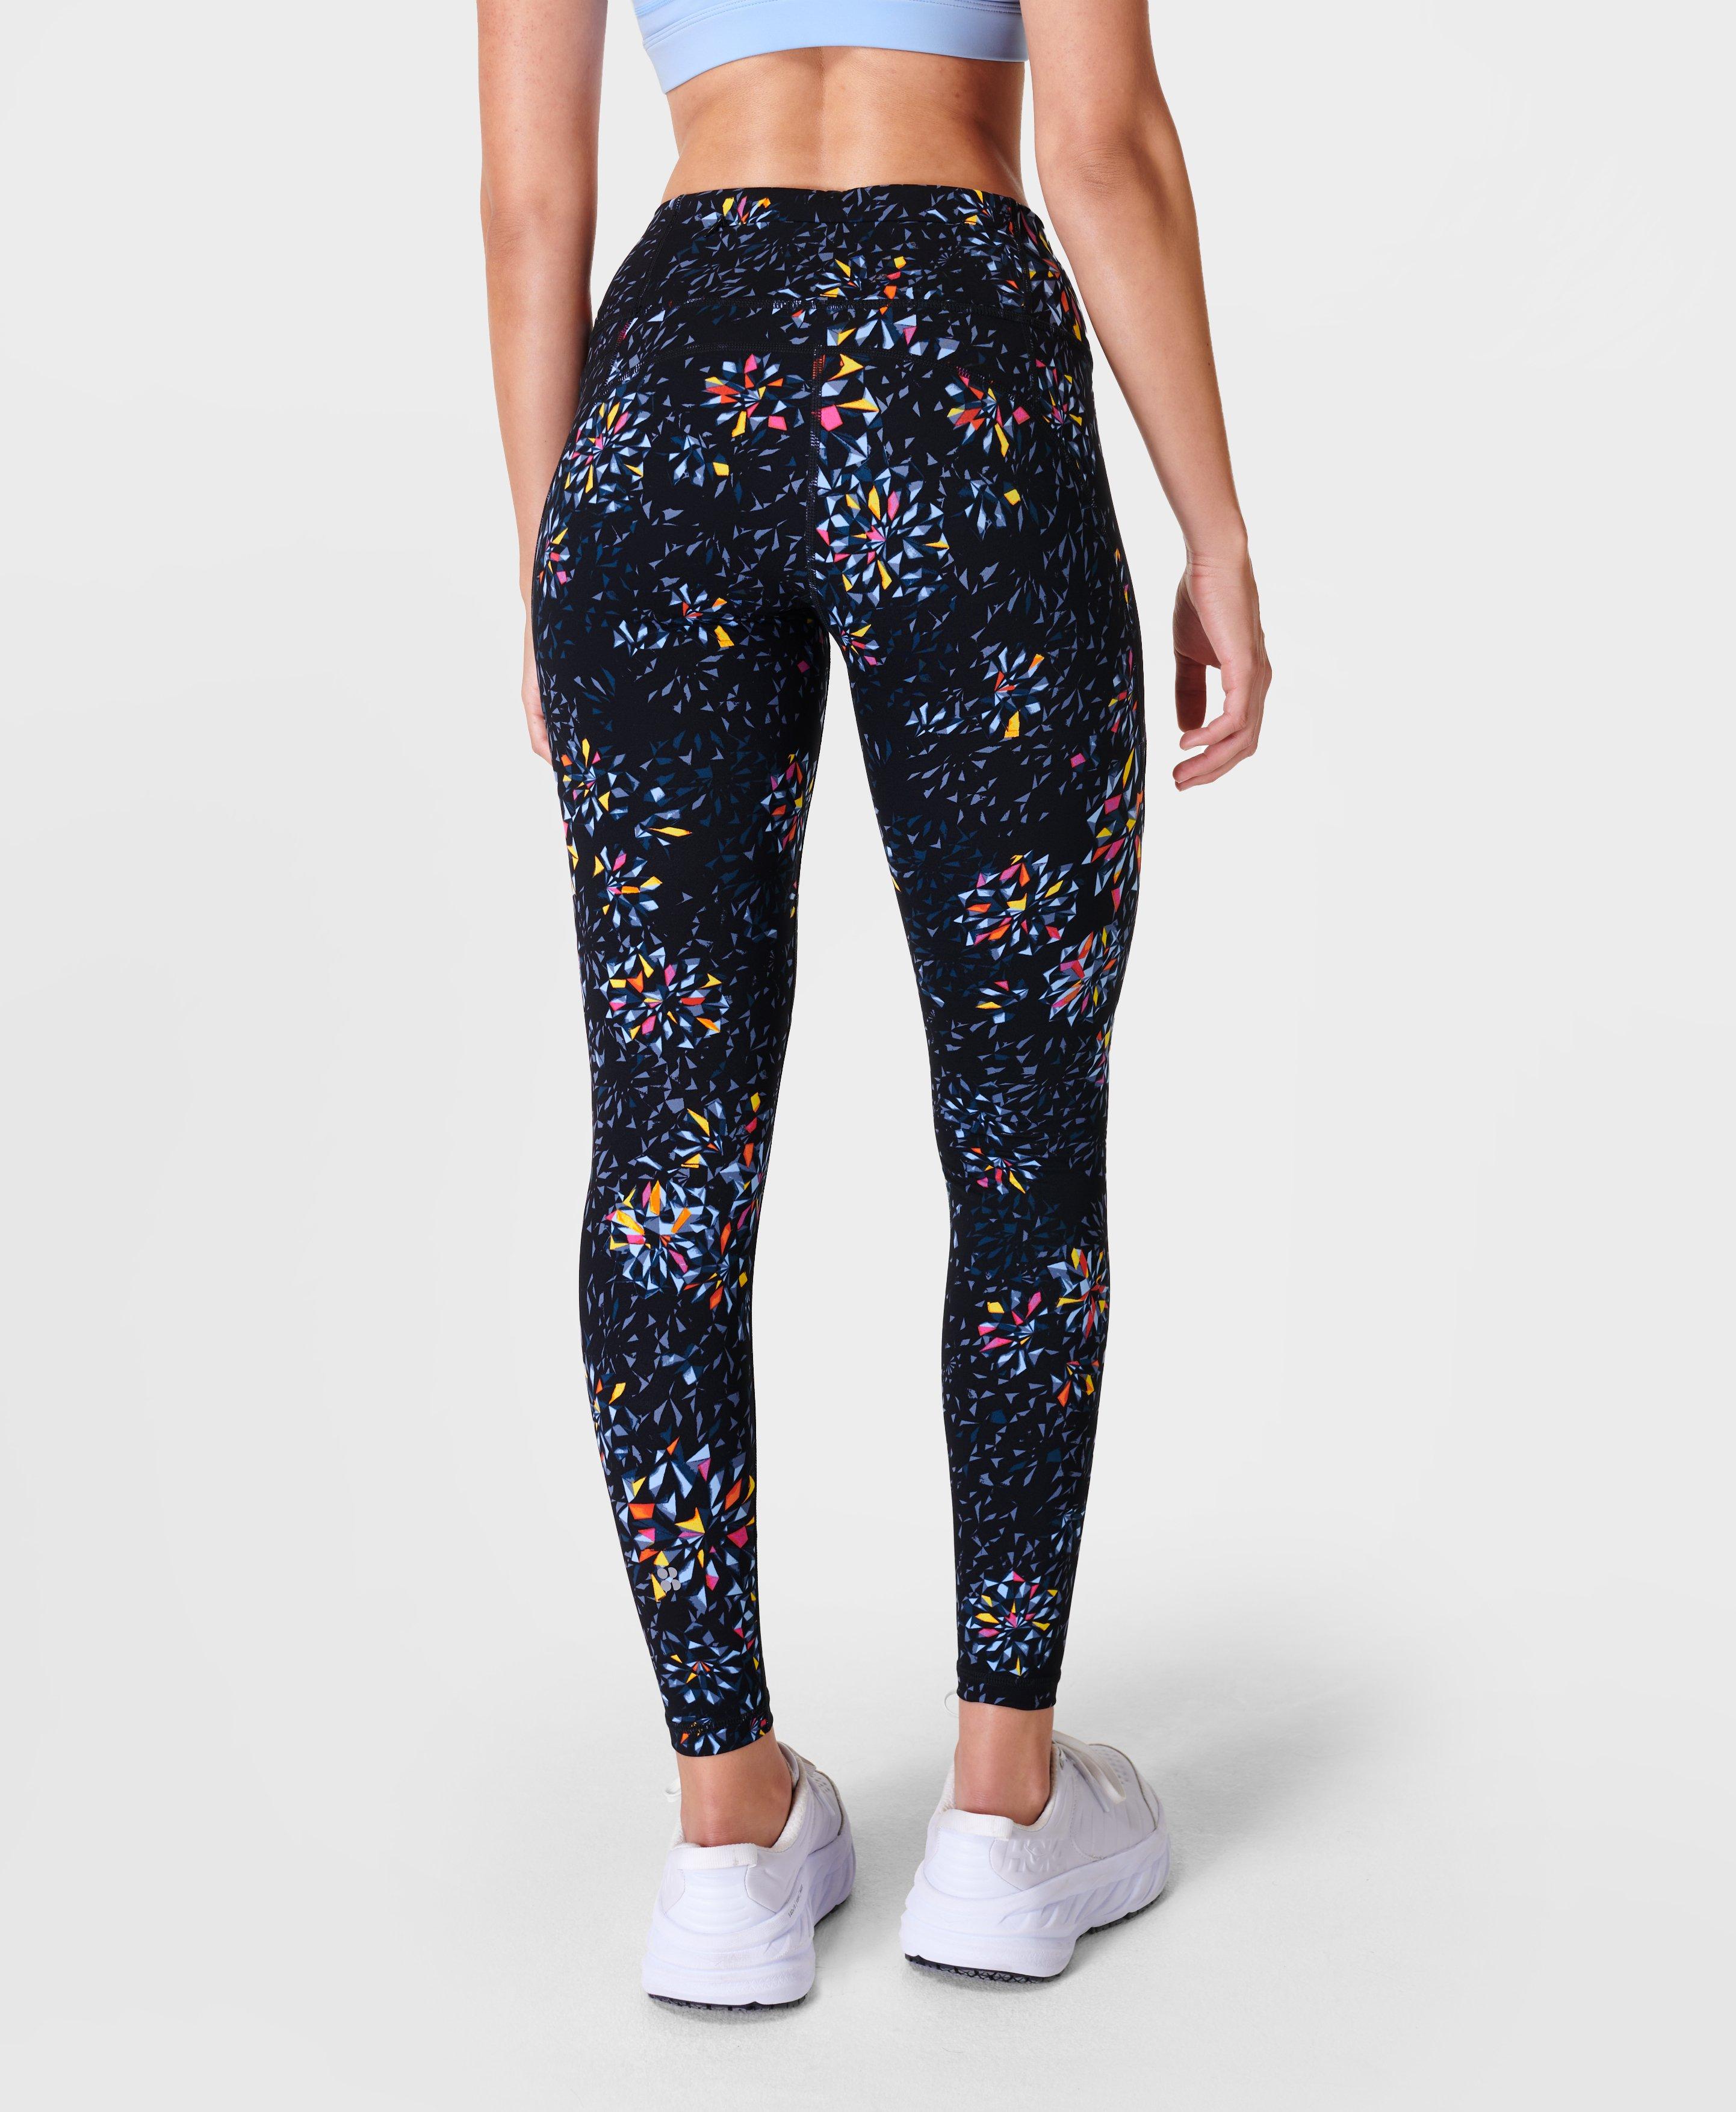 Floral Printed High Waist Jogging Black Workout Leggings 50% Off For Womens  Fitness And Yoga From Shining4u, $12.57